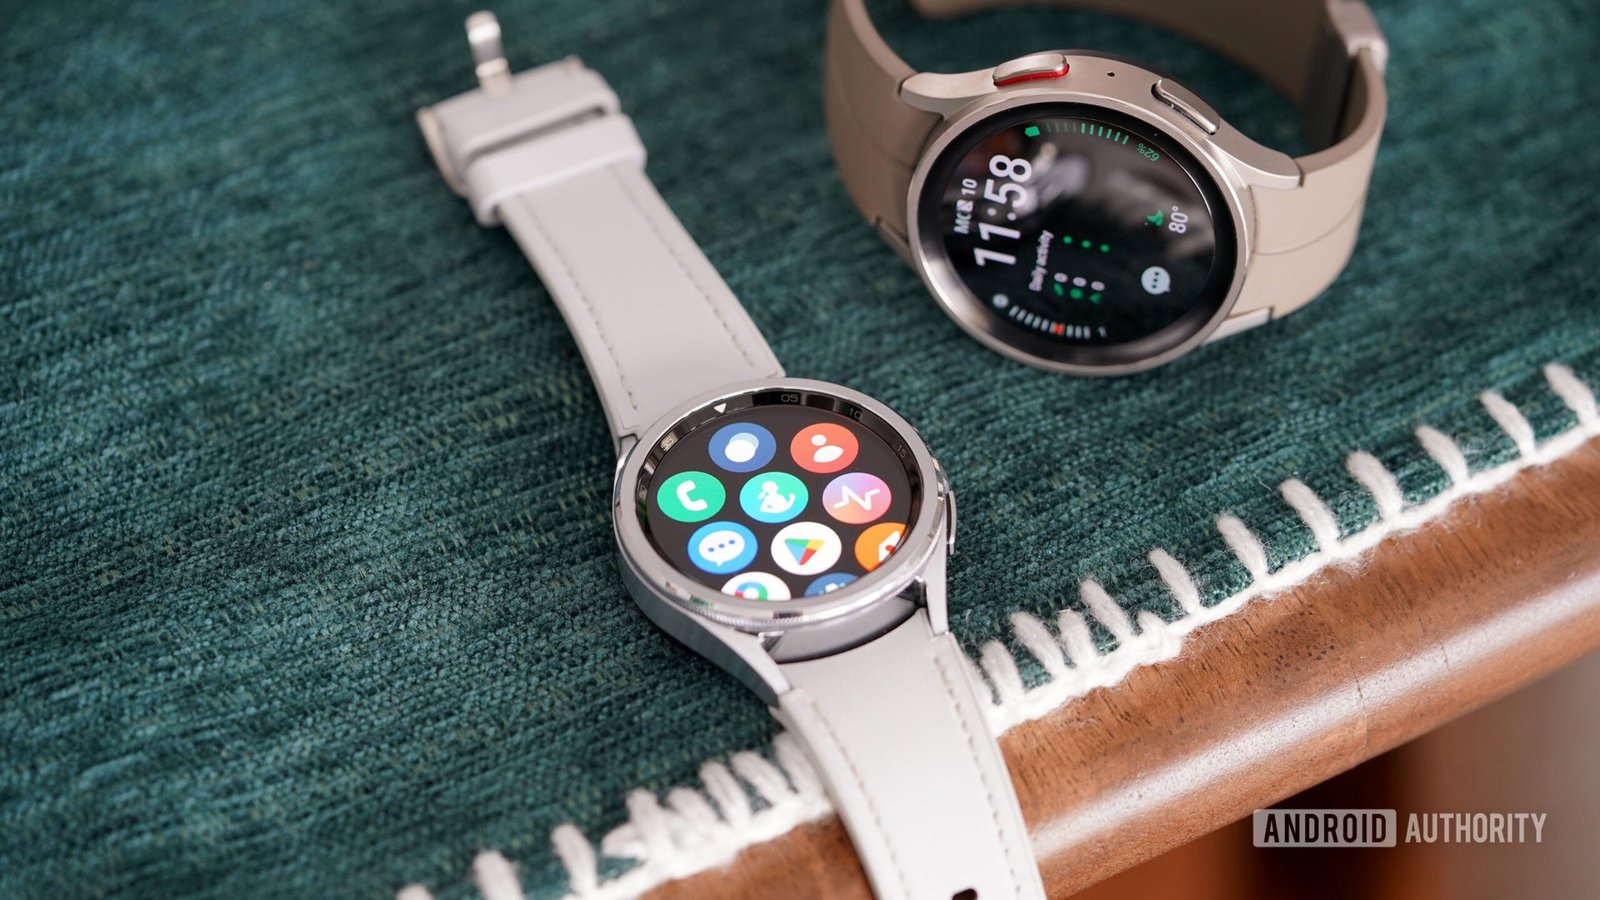 Samsung just bumped up the trade-in values for really old Galaxy Watches